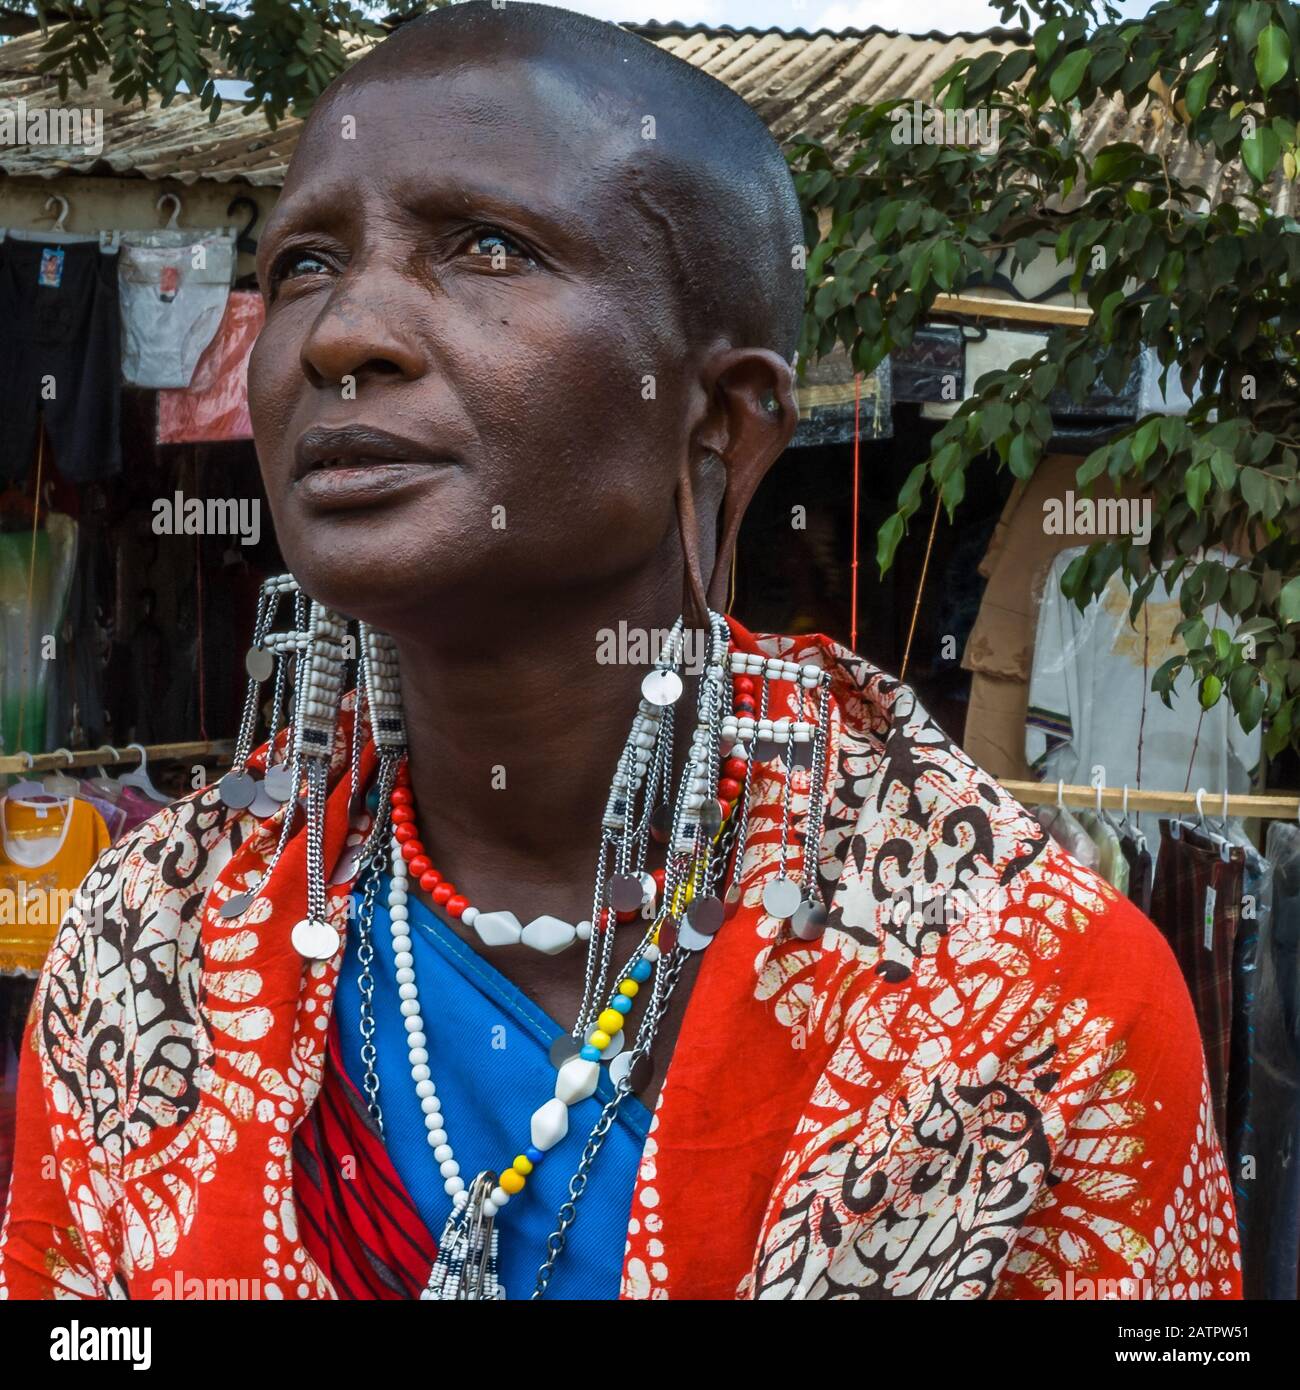 A Maasai Lady in the market at Arusha. Ear piercing and the stretching of earlobes are also part of Maasai culture Stock Photo